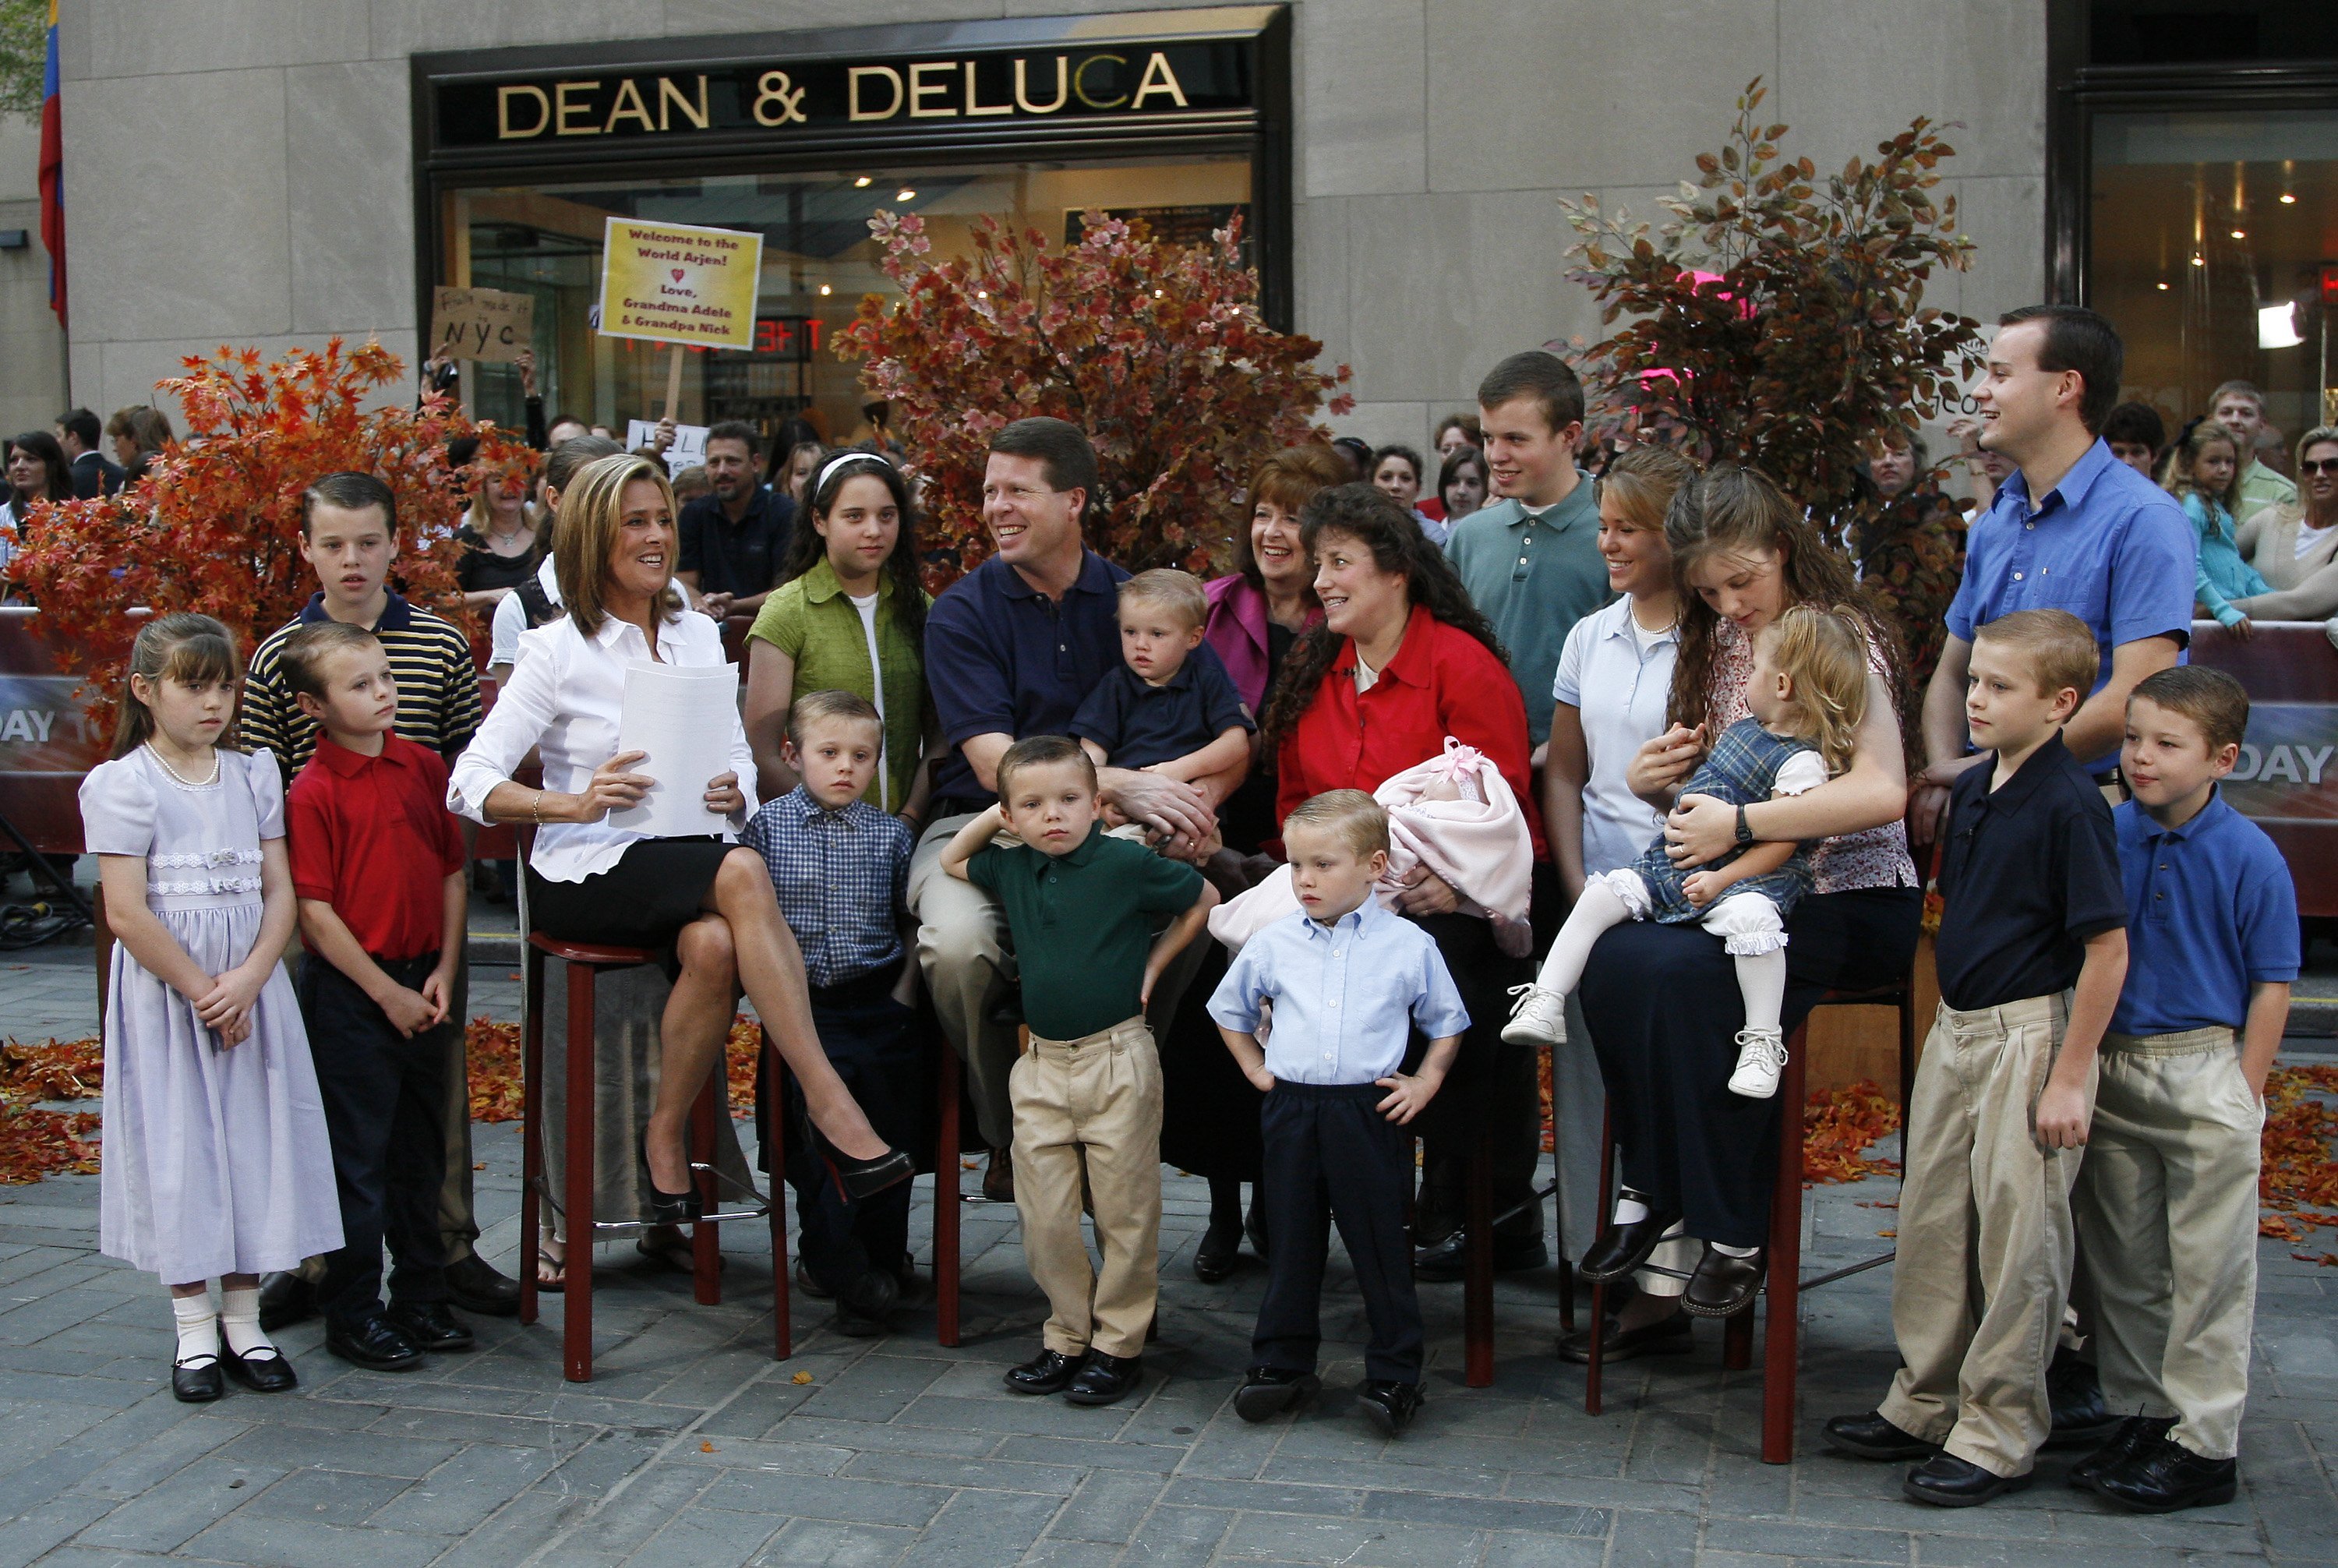 Members of the Duggar family standing outside a Dean & Deluca in 2007